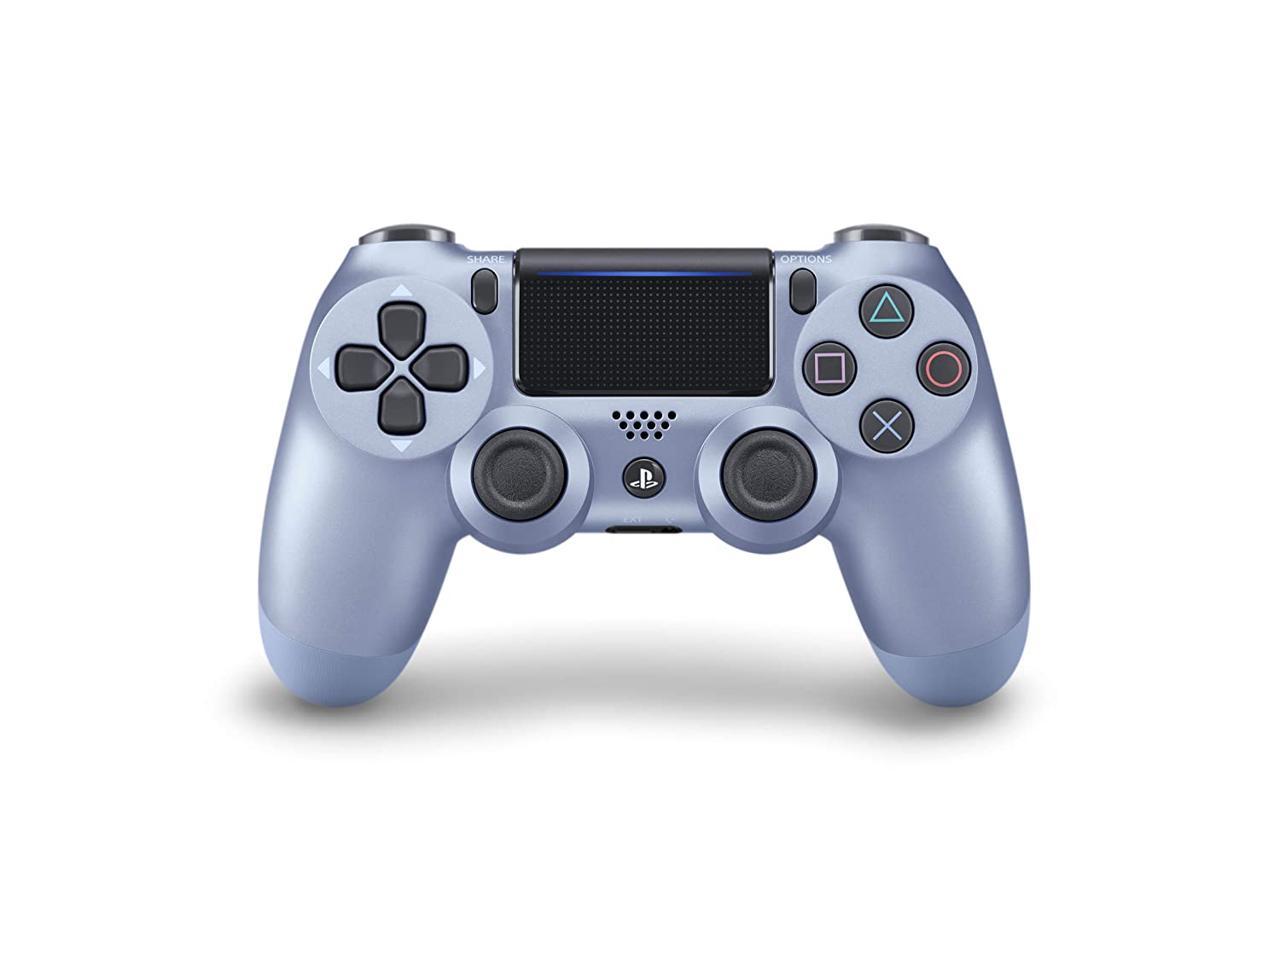 PS4 Wireless Controller Game Pad for SONY PlayStation 4 Dualshock - Titanium Blue,Hot PS4 Wireless Controller Game Pad for SONY PlayStation Dualshock 4 Camouflage